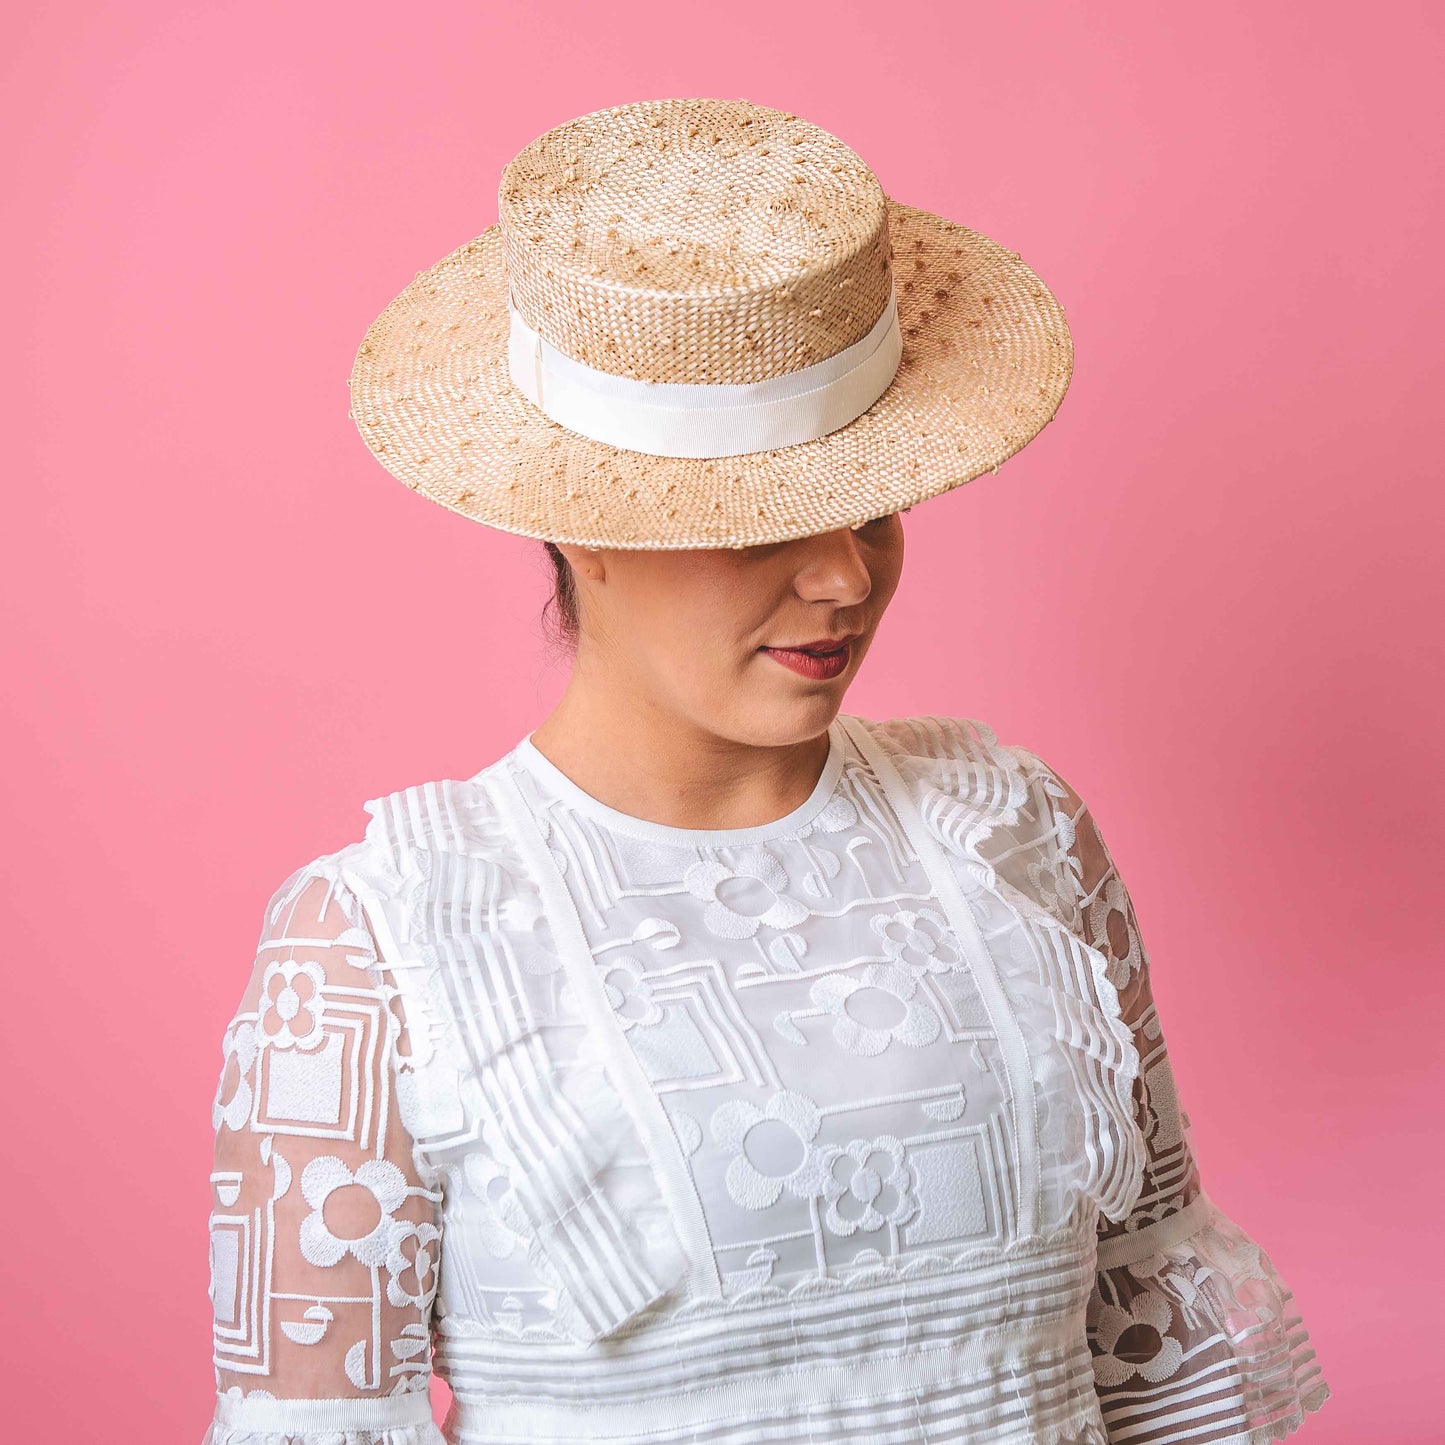 Alexandra Knotted Straw Boater in Cream with white band